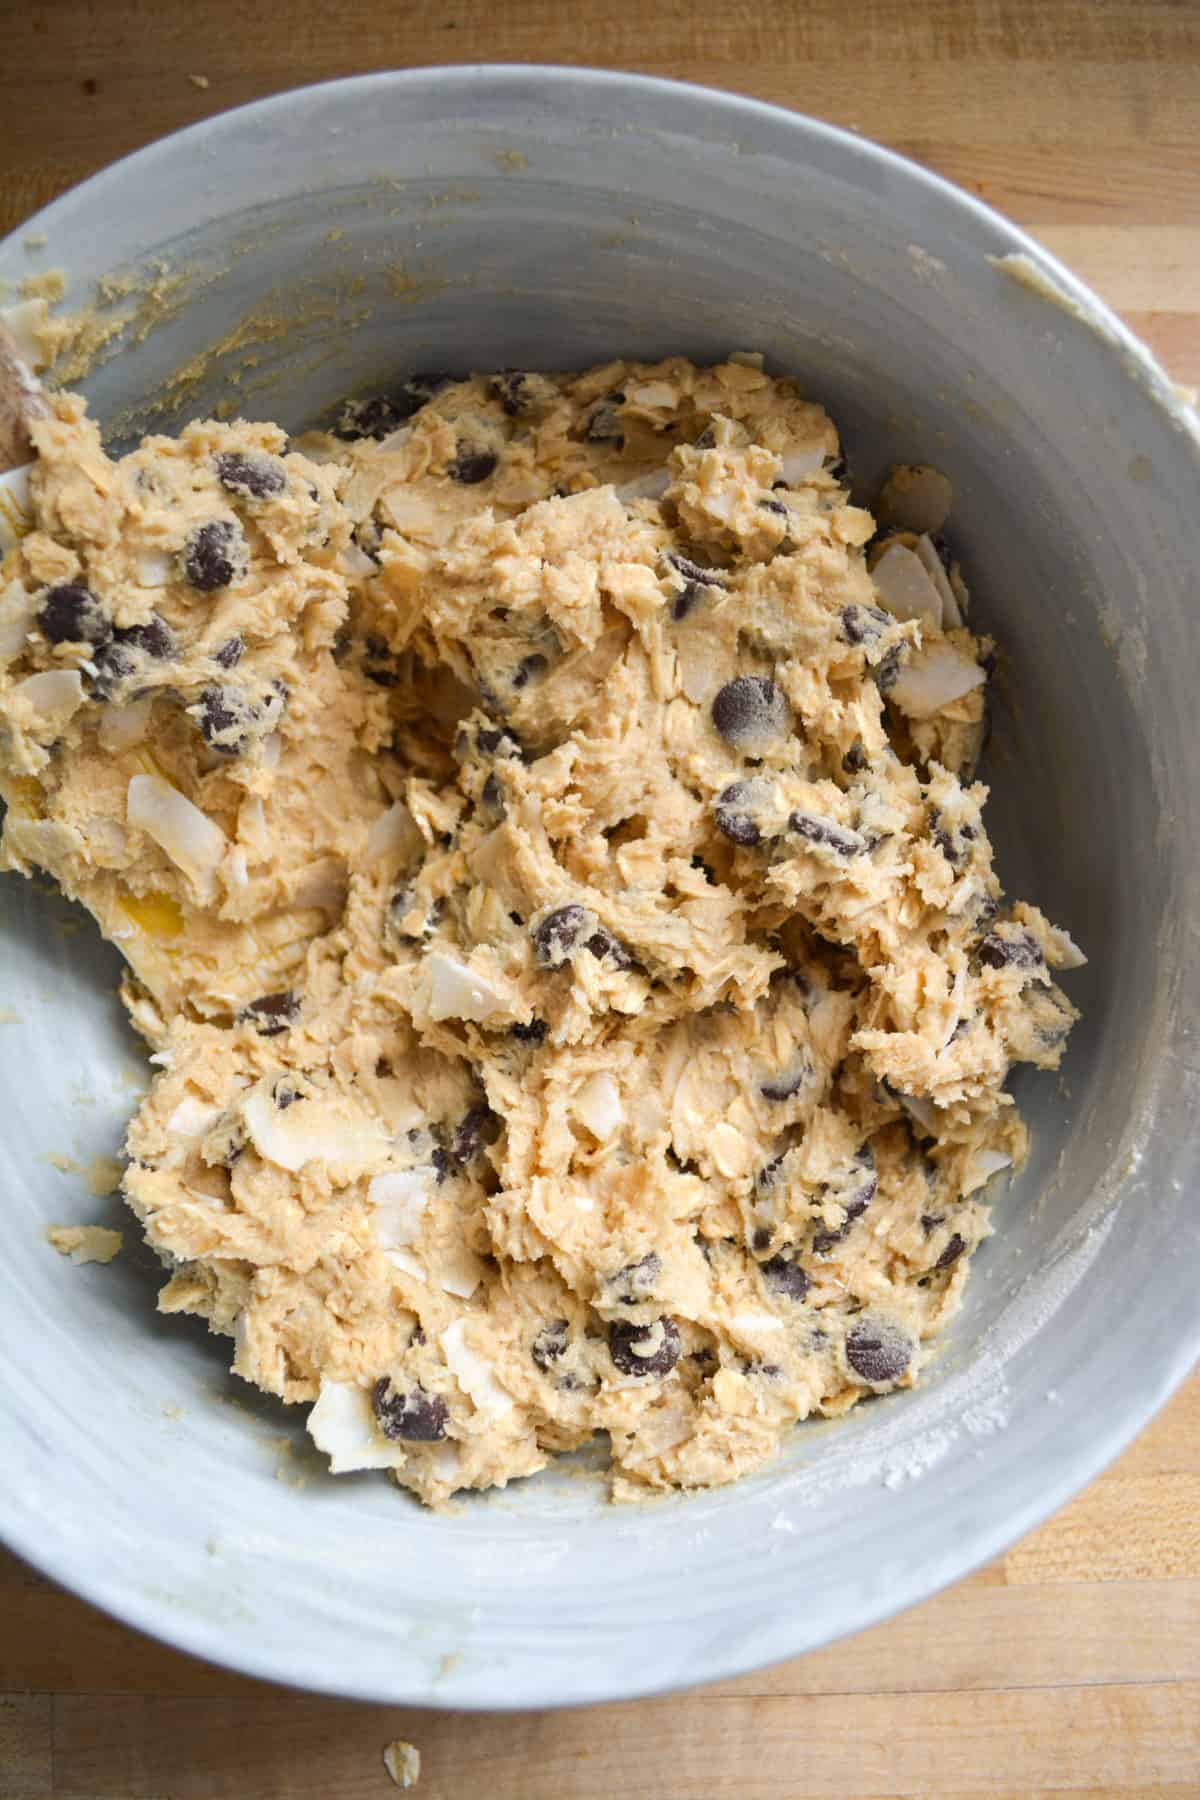 Coconut flakes and chocolate chips mixed into the oatmeal cookie dough in a mixing bowl.